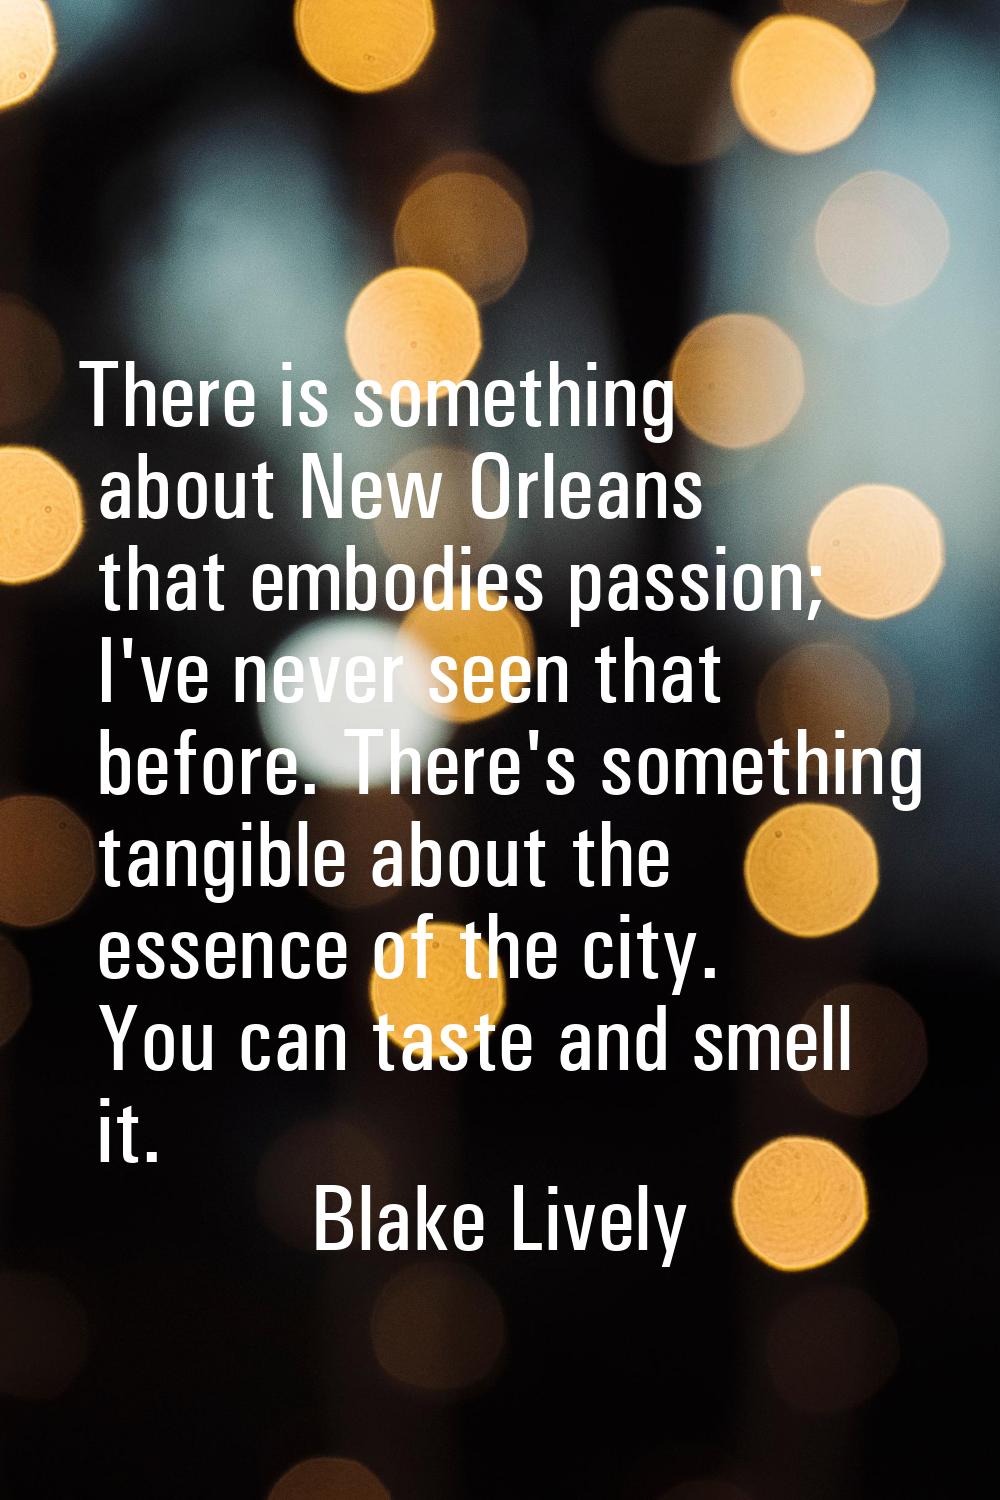 There is something about New Orleans that embodies passion; I've never seen that before. There's so